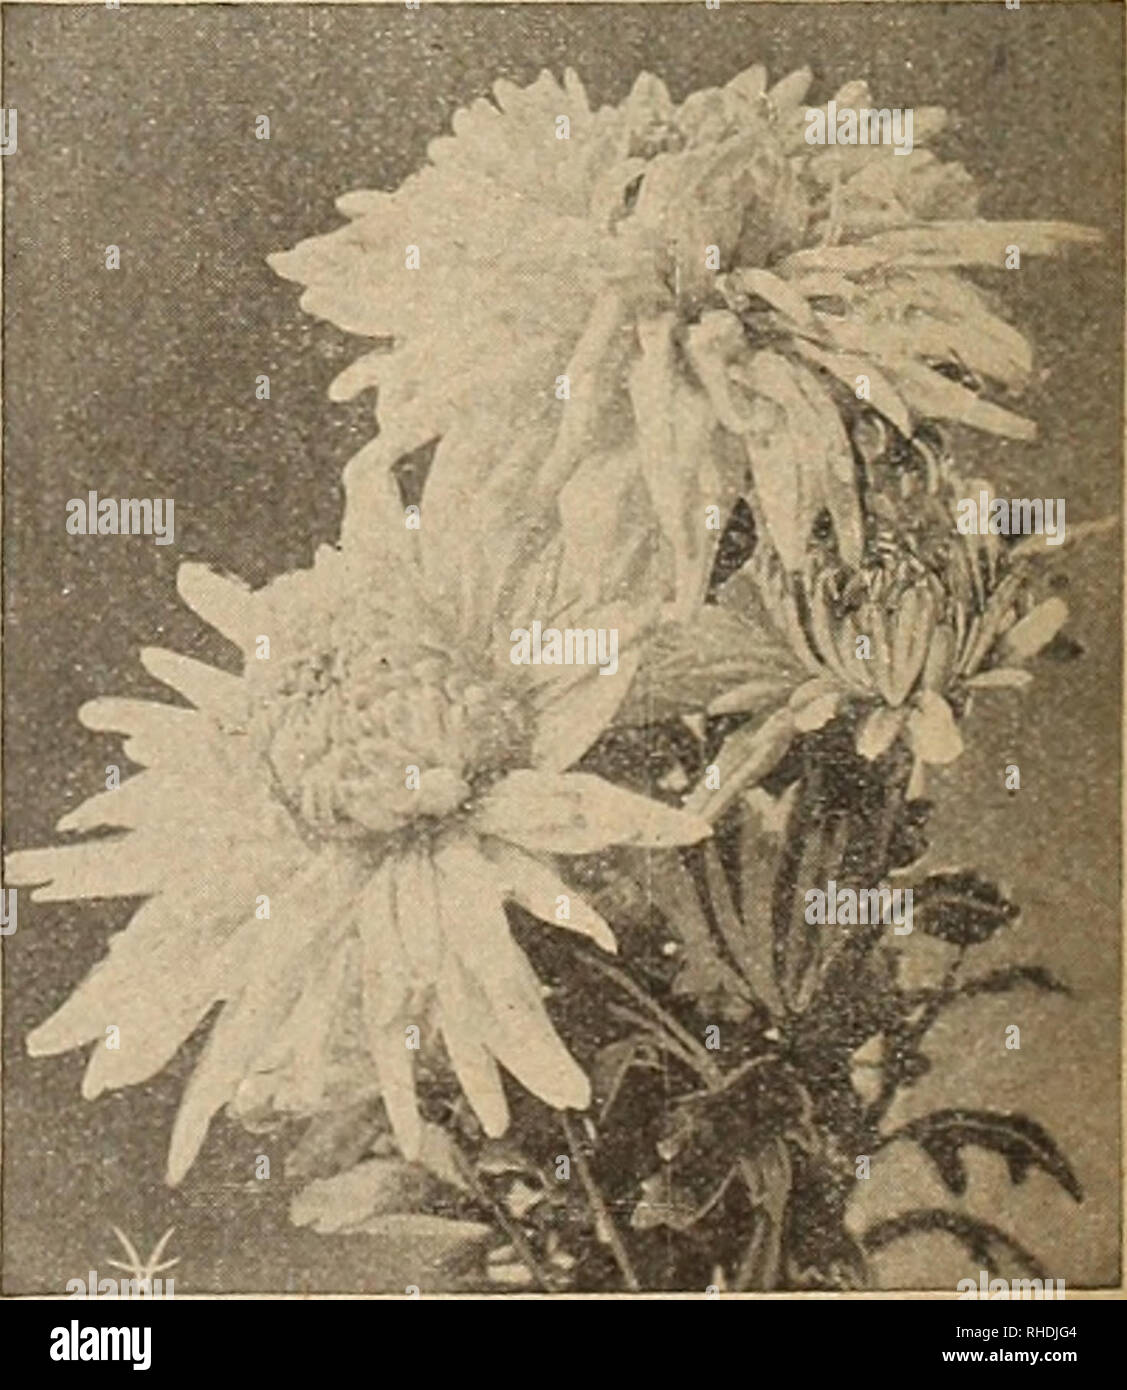 . Book for florists. Flowers Seeds Catalogs; Bulbs (Plants) Seedlings Catalogs; Vegetables Seeds Catalogs; Trees Seeds Catalogs; Horticulture Equipment and supplies Catalogs. CHRYSANTHEMUMS—For Pot Culture We have found the following varieties to be among the best. Strong plants, from 2,'4-inch pots. Those marked (*) are also good varieties for bench culture. Each Doz. 100 August Dasse. Golden-yellow $0.15 $1.00 $7.00 Brutus. Beautiful shade of bronze; most useful as a specimen plant 15 1.25 8.00 Charles W. Rager. A pure white incurved 15 .85 6.00 *Chieftain. A rose-pink, commercial variety of Stock Photo